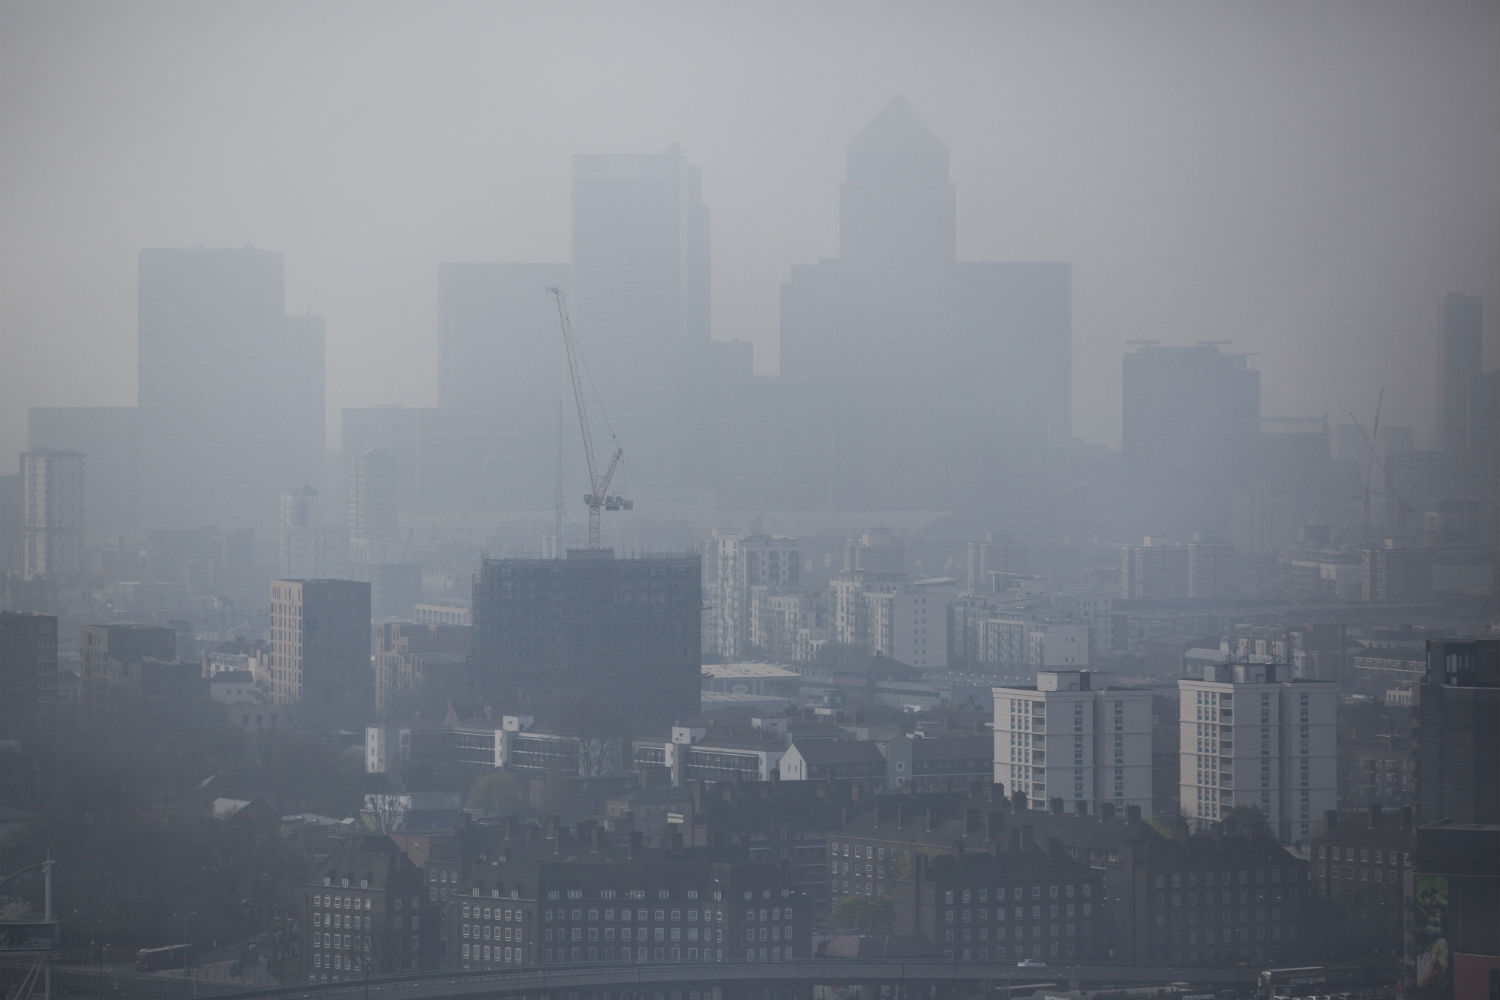 High levels of air pollution in London were caused in part by Sahara sand (Photo by Dan Kitwood/Getty Images)